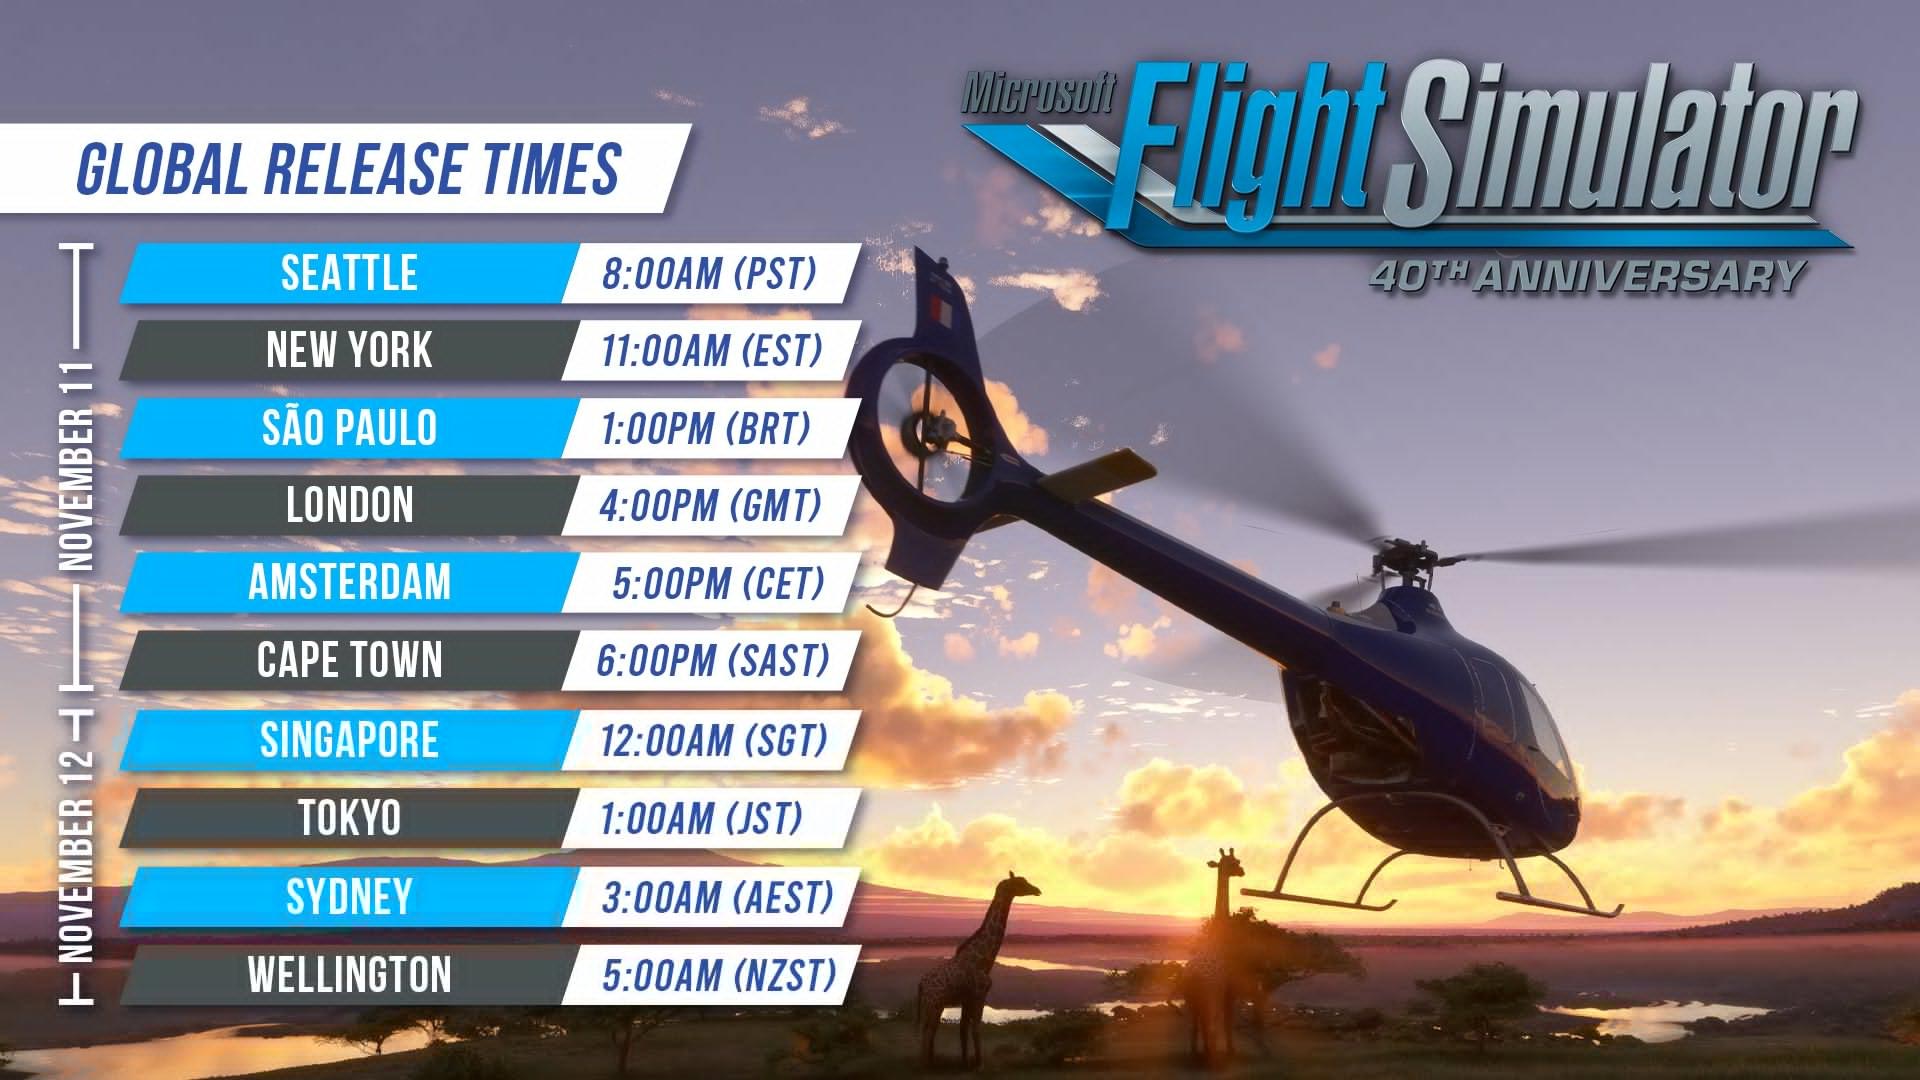 Microsoft Flight Simulator Sim Update 11 (40th Anniversary Edition) Launches This Week; Global Release Times Revealed!